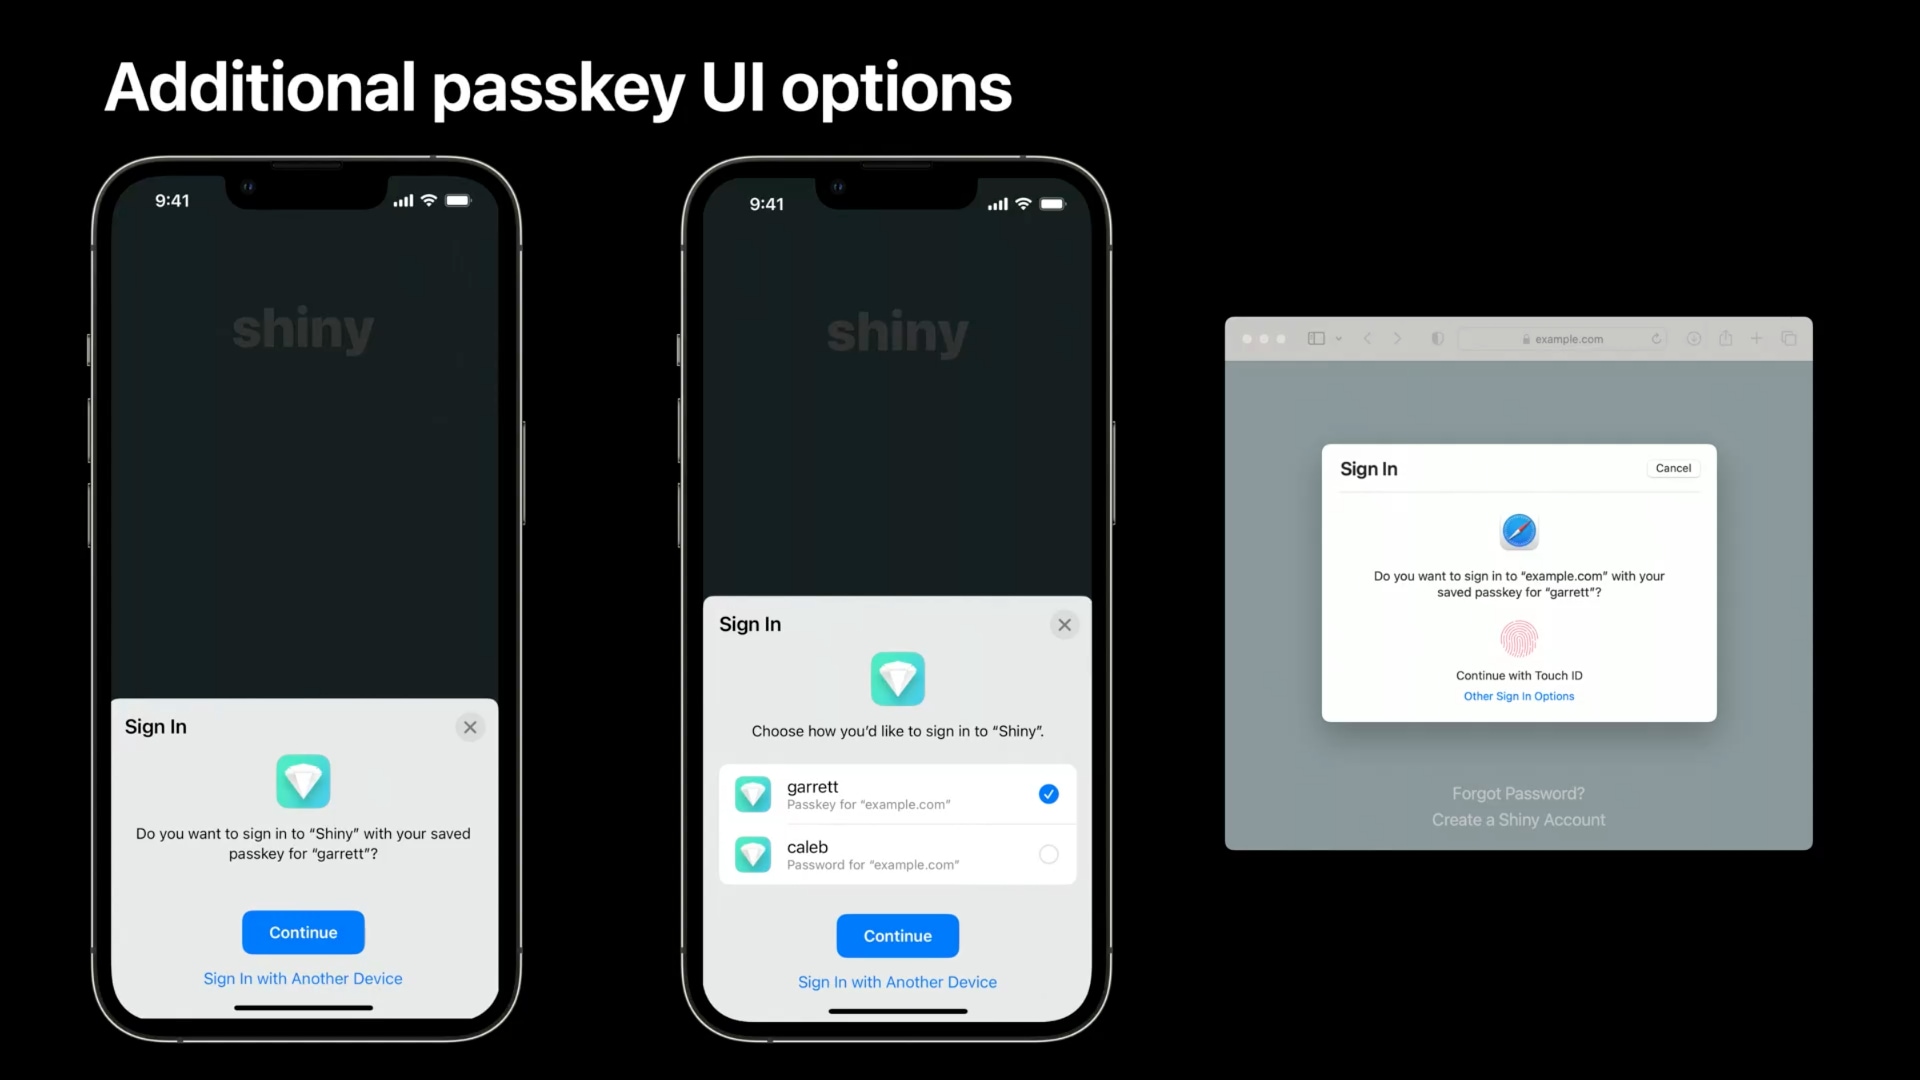 After Apple, Google is adding passkeys support to Android and Chrome